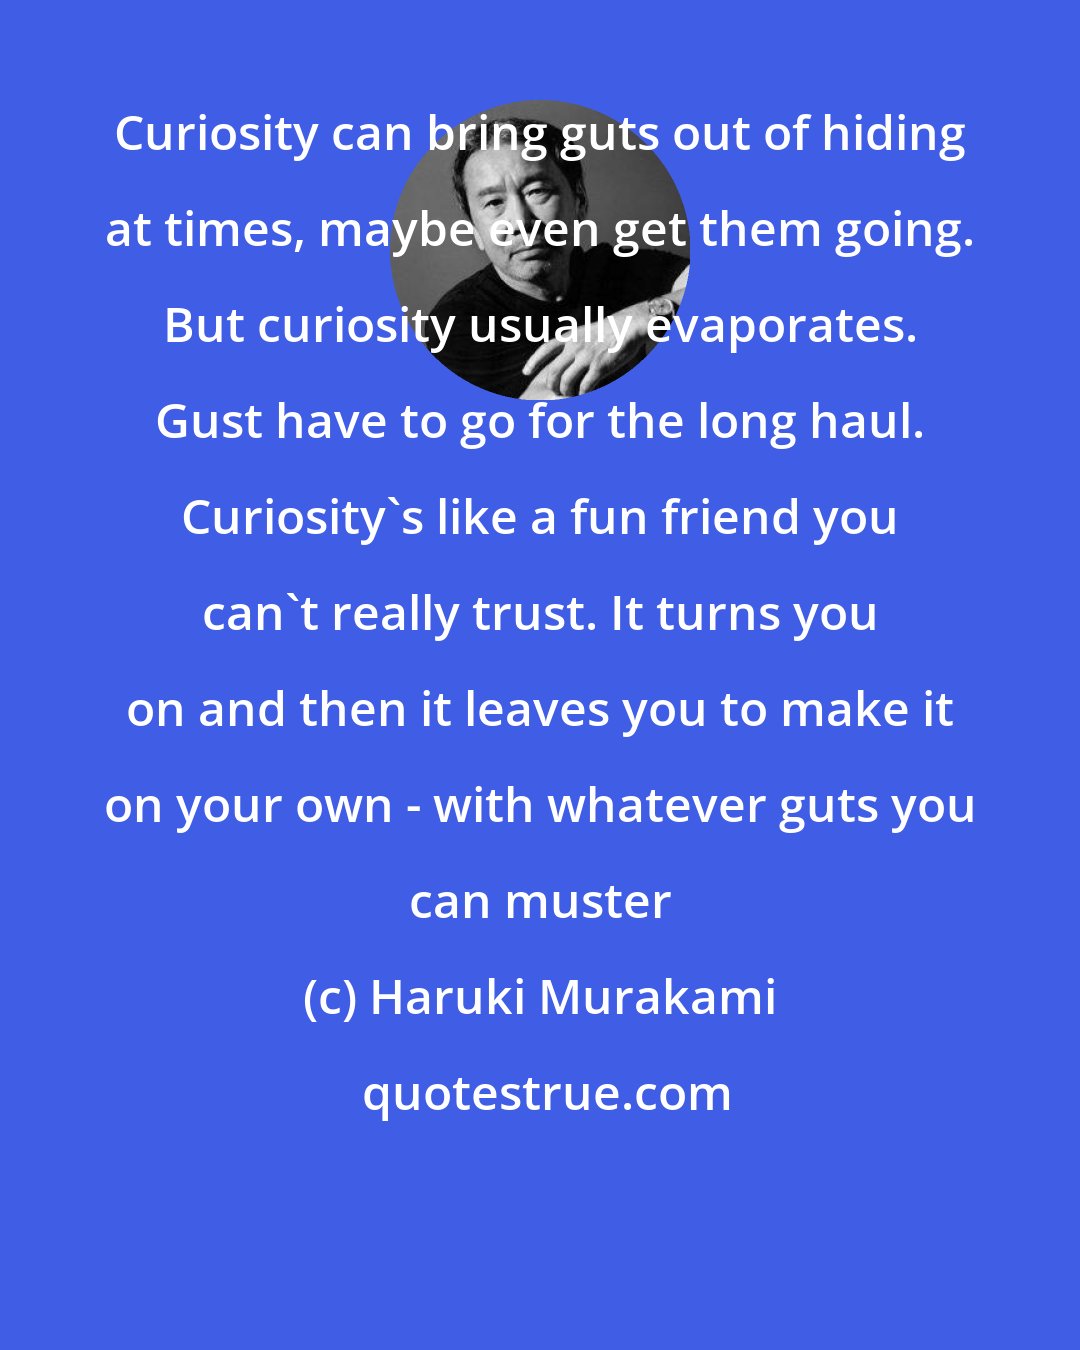 Haruki Murakami: Curiosity can bring guts out of hiding at times, maybe even get them going. But curiosity usually evaporates. Gust have to go for the long haul. Curiosity's like a fun friend you can't really trust. It turns you on and then it leaves you to make it on your own - with whatever guts you can muster